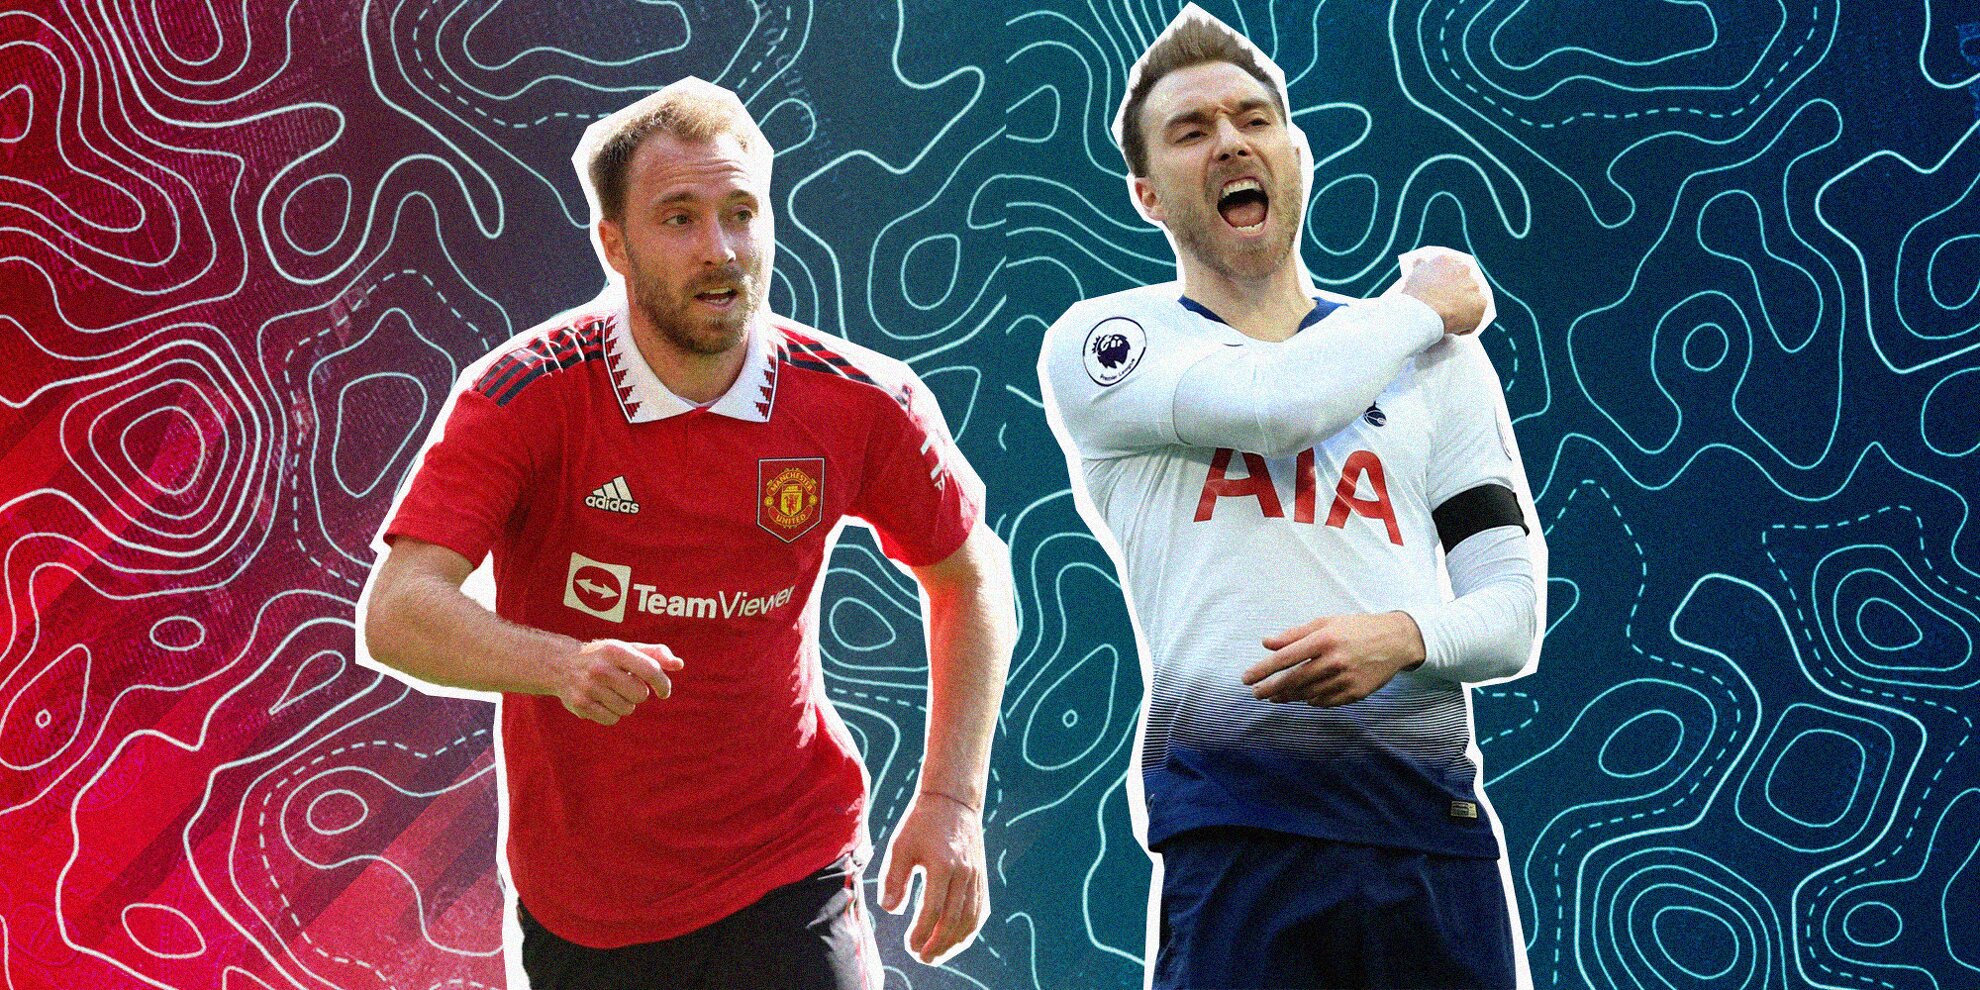 Top 10 players to play for both Manchester United and Tottenham Hotspurs